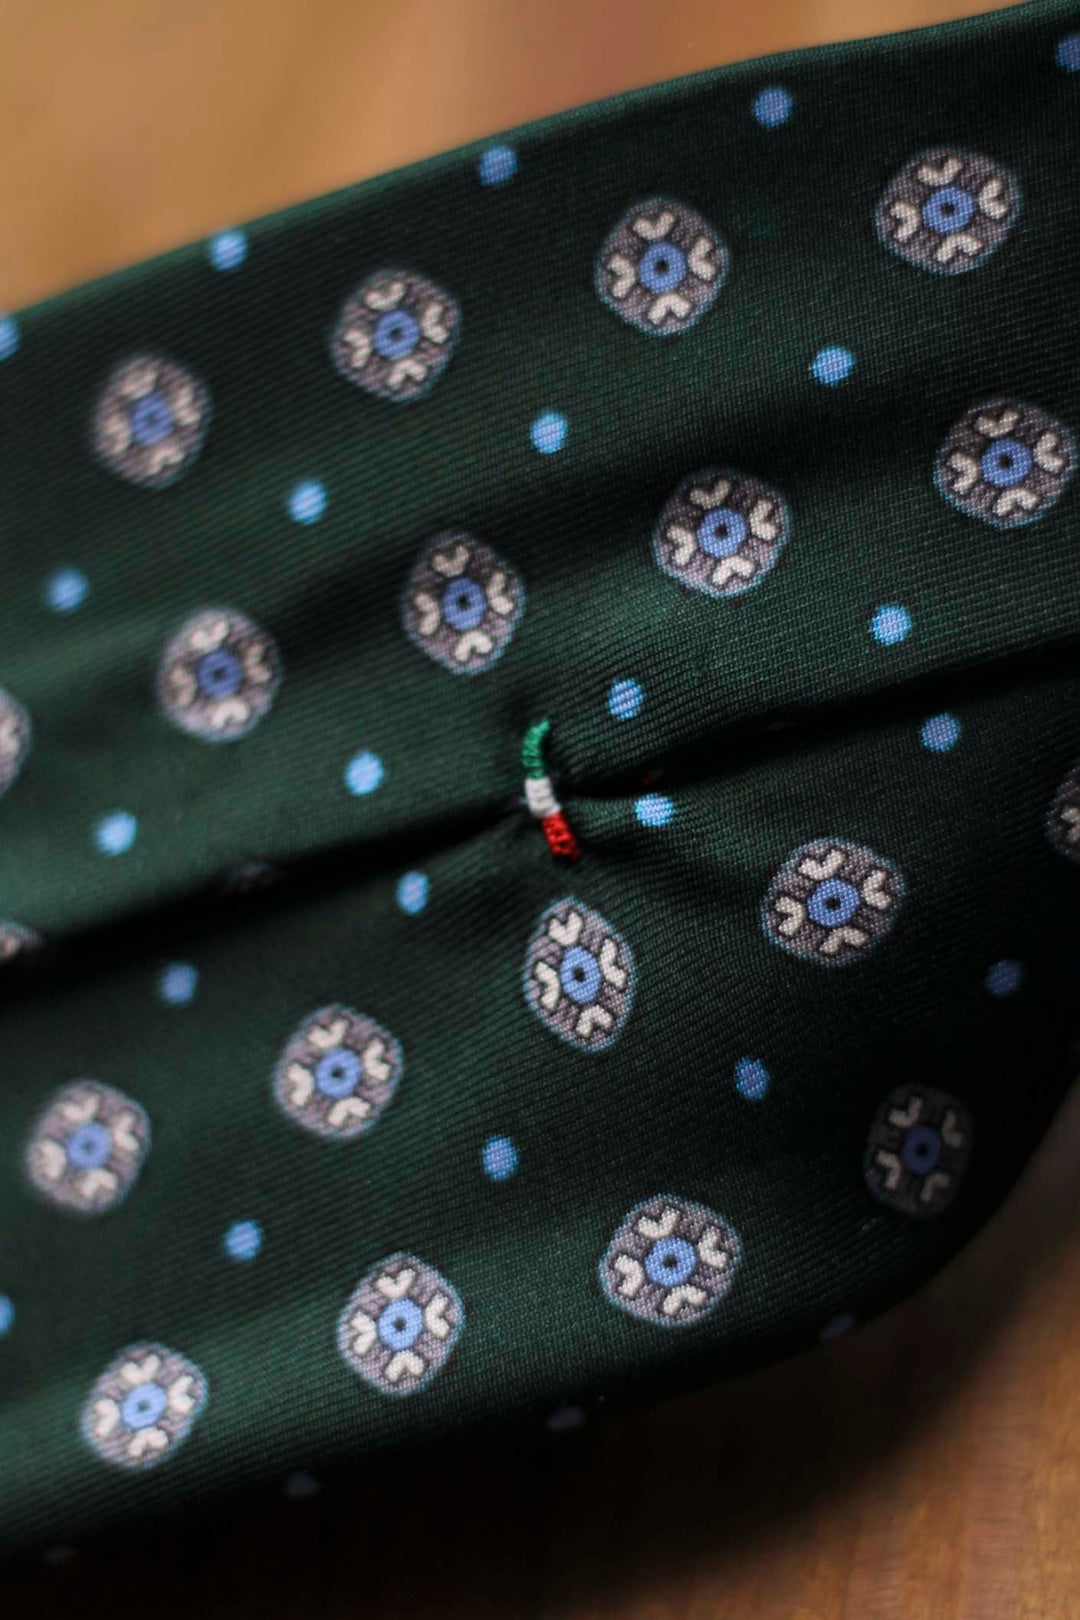 Napoli Silk Bottle Green Tie Sky Blue and White Geometry